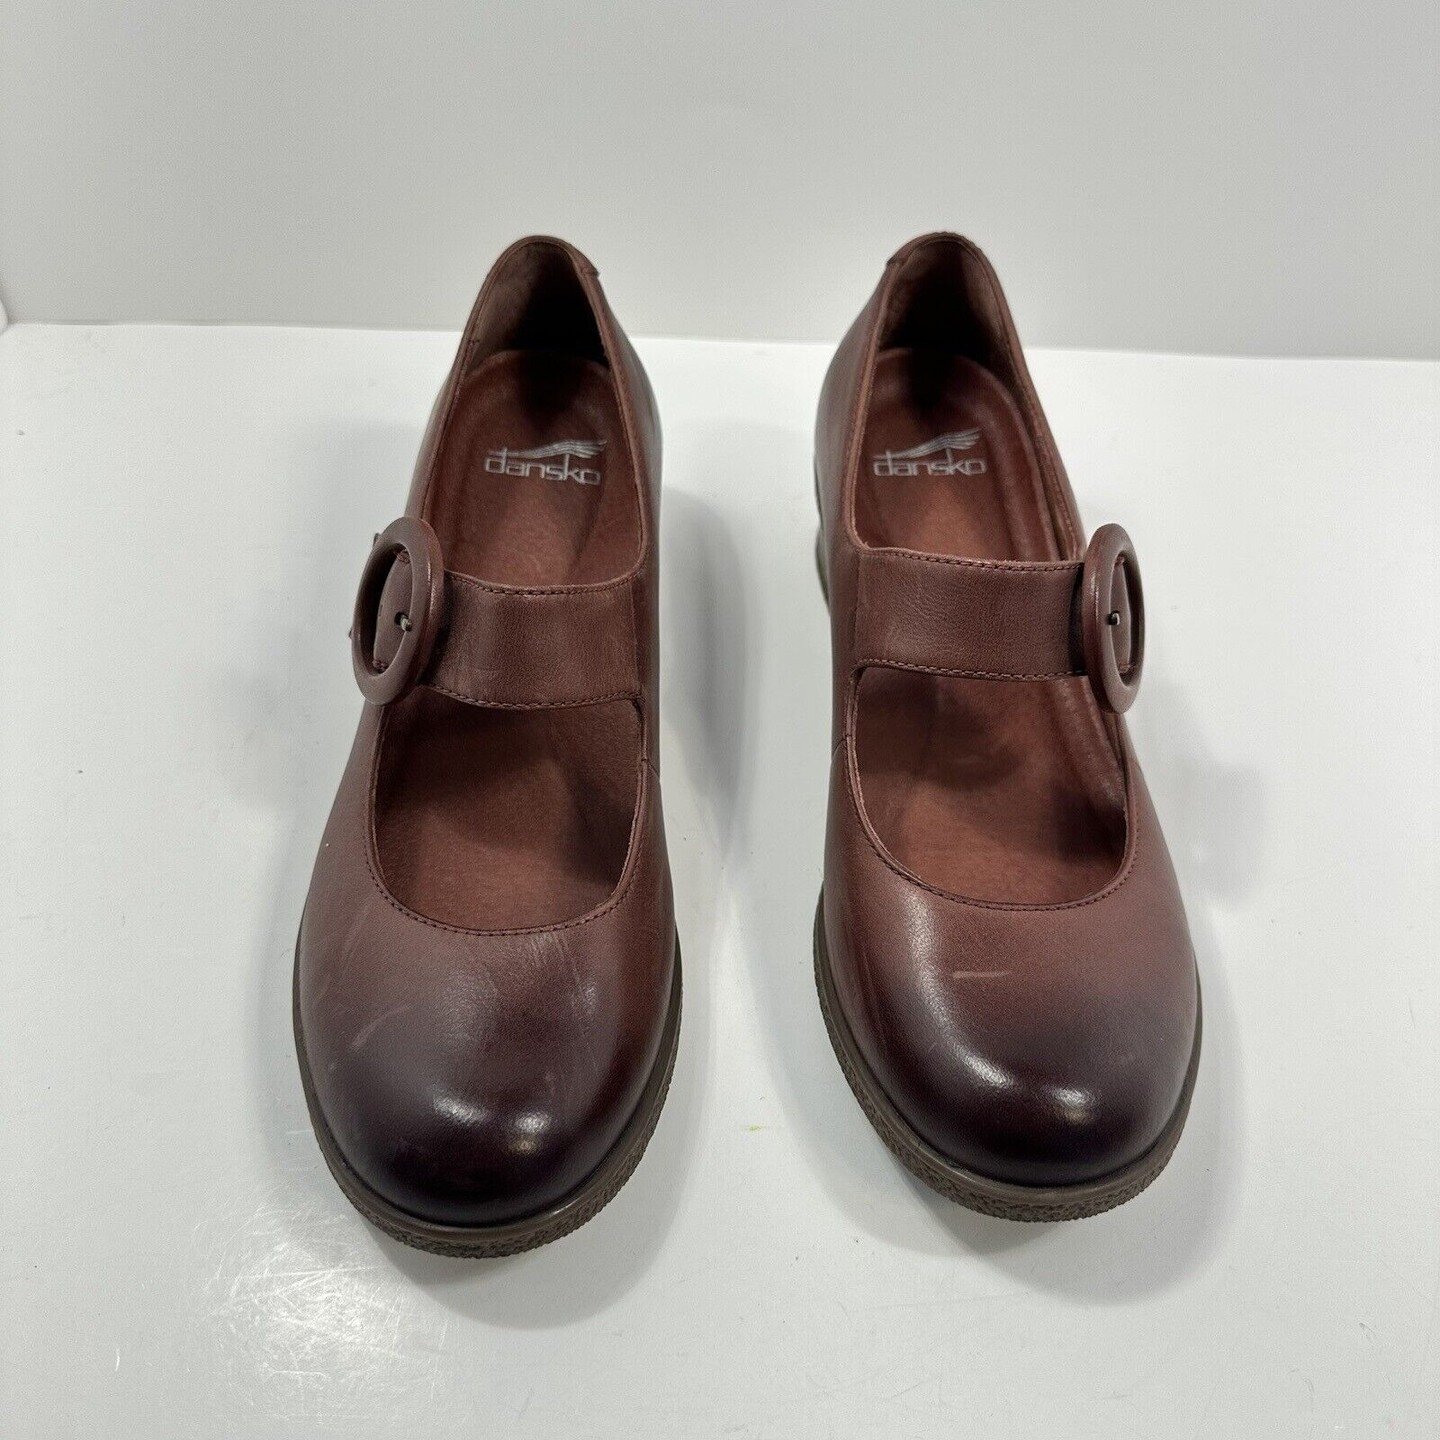 Preowned Dansko Women's Waterproof Brandy Burnished Mary Jane Comfort Shoes US 9
$69.00

These are awesome. Soft and in good preowned condition. Size 39 or US 9. Adjustable top strap. 1&quot; heel rise.
#ebayseller
#poshmarkseller
#mercariseller
#com